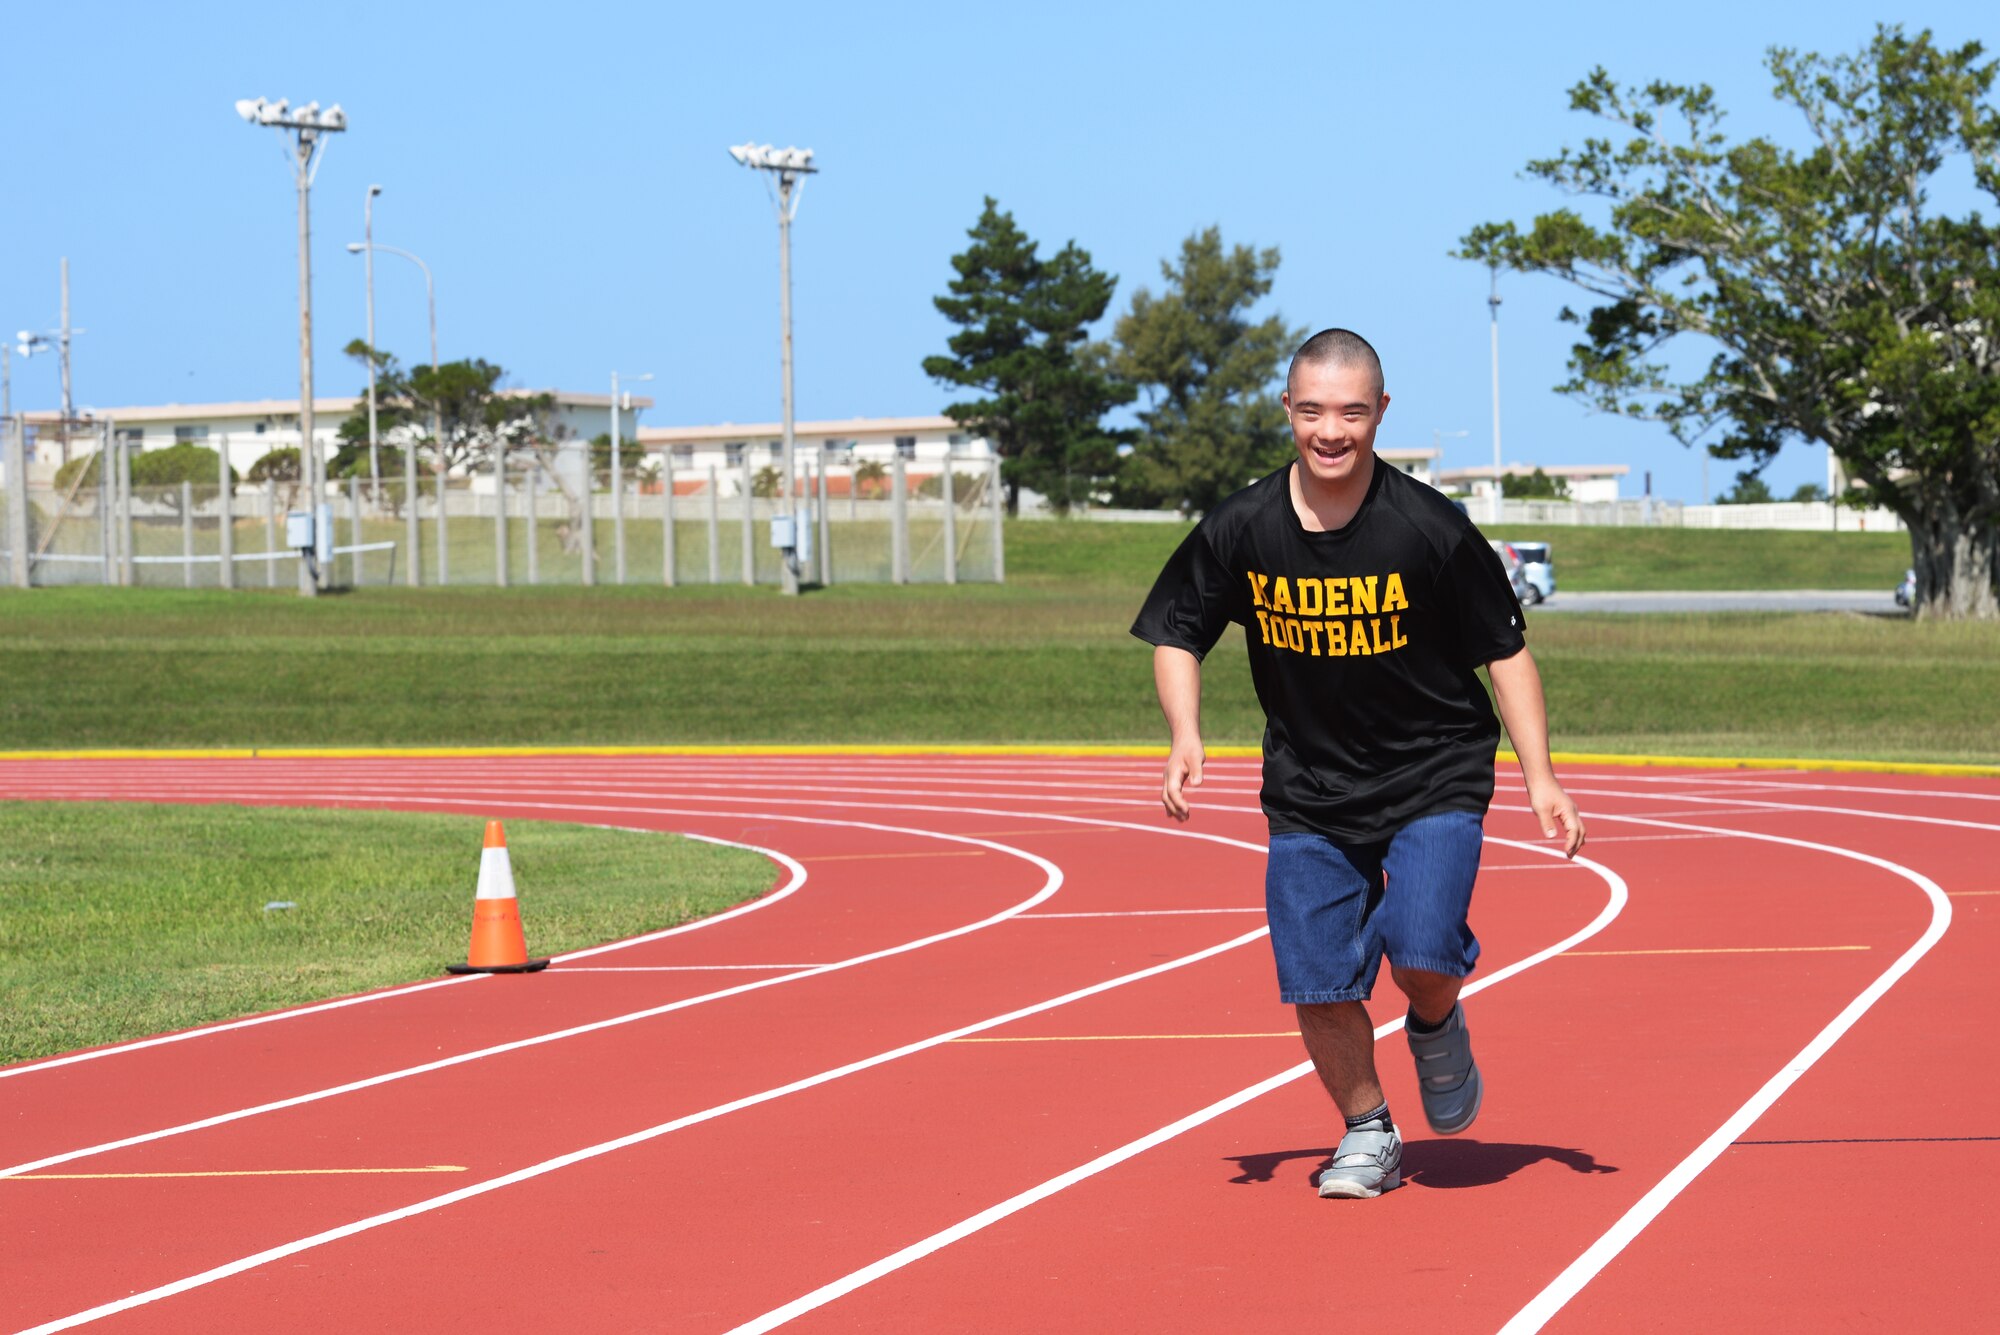 Ty Murdock, Kadena High School 12th grade student, practices for the 30-meter dash of the Kadena Special Olympics at the high school track Oct. 27, 2015, on Kadena Air Base, Japan. Murdock will compete again this year at the KSO. Last year, he placed first in his heat and practices for this year’s event by running around his neighborhood block and hiking for miles with his father. (U.S. Air Force photo by Senior Airman Omari Bernard)